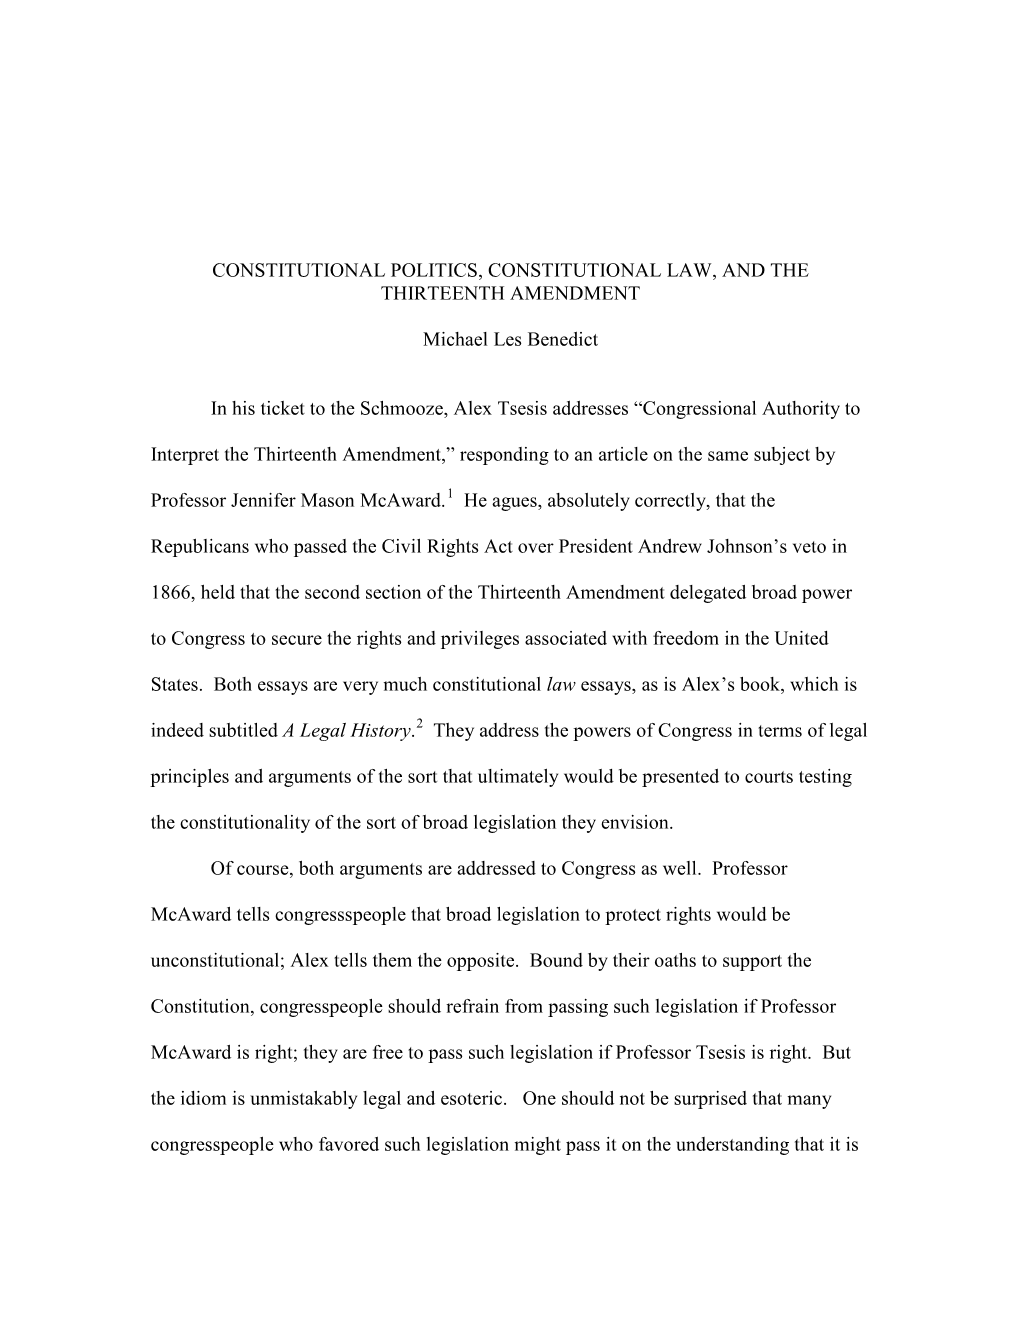 Constitutional Politics, Constitutional Law, and the Thirteenth Amendment